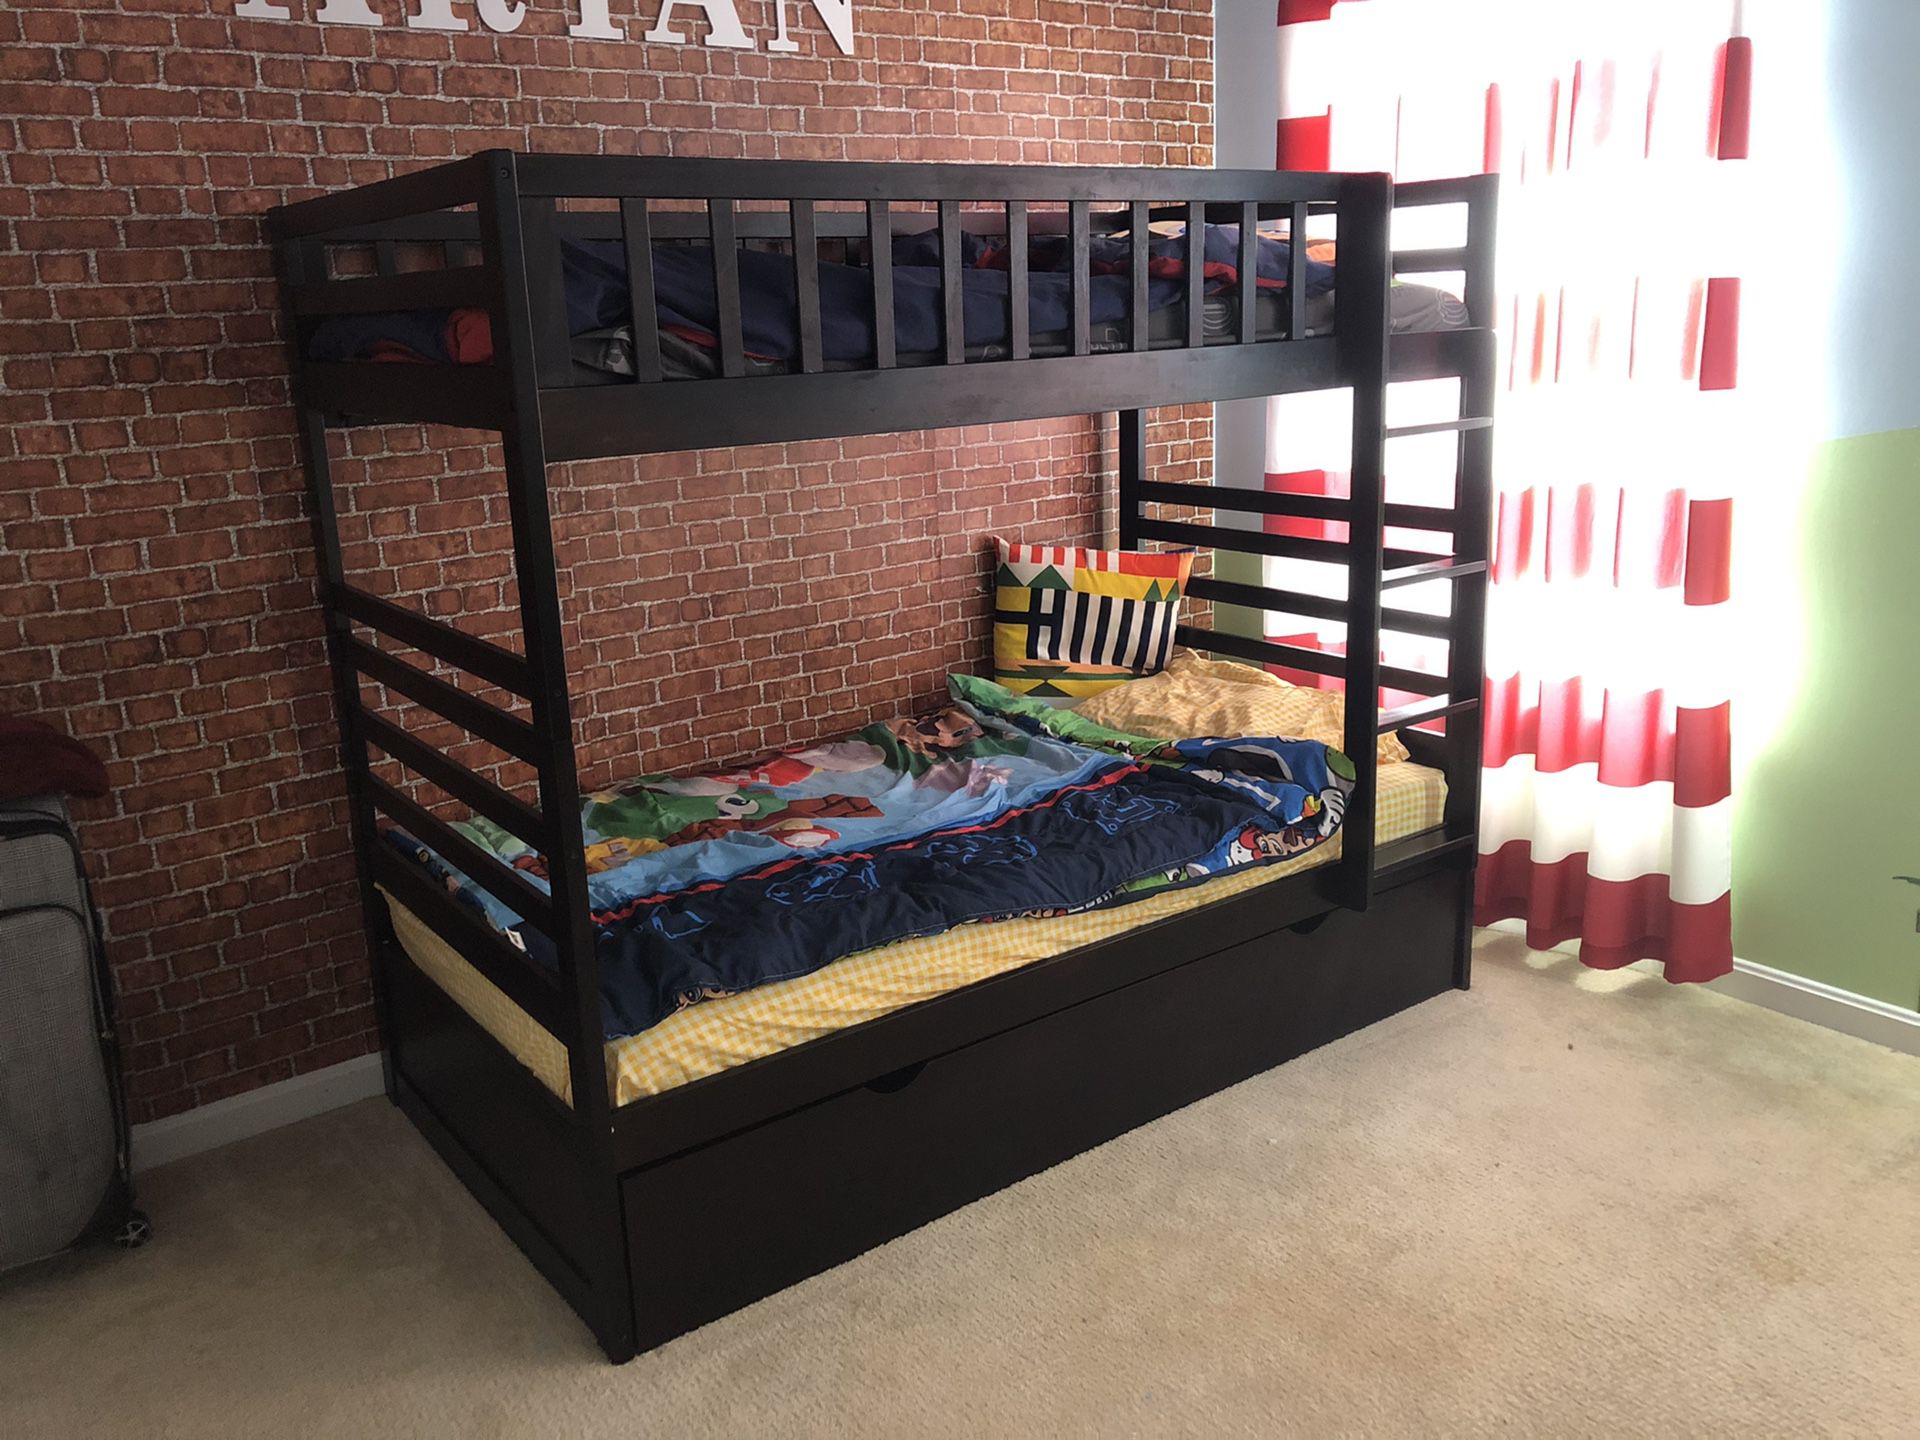 3 Bed Bunk Bed Including All 3 Mattresses and Bedding